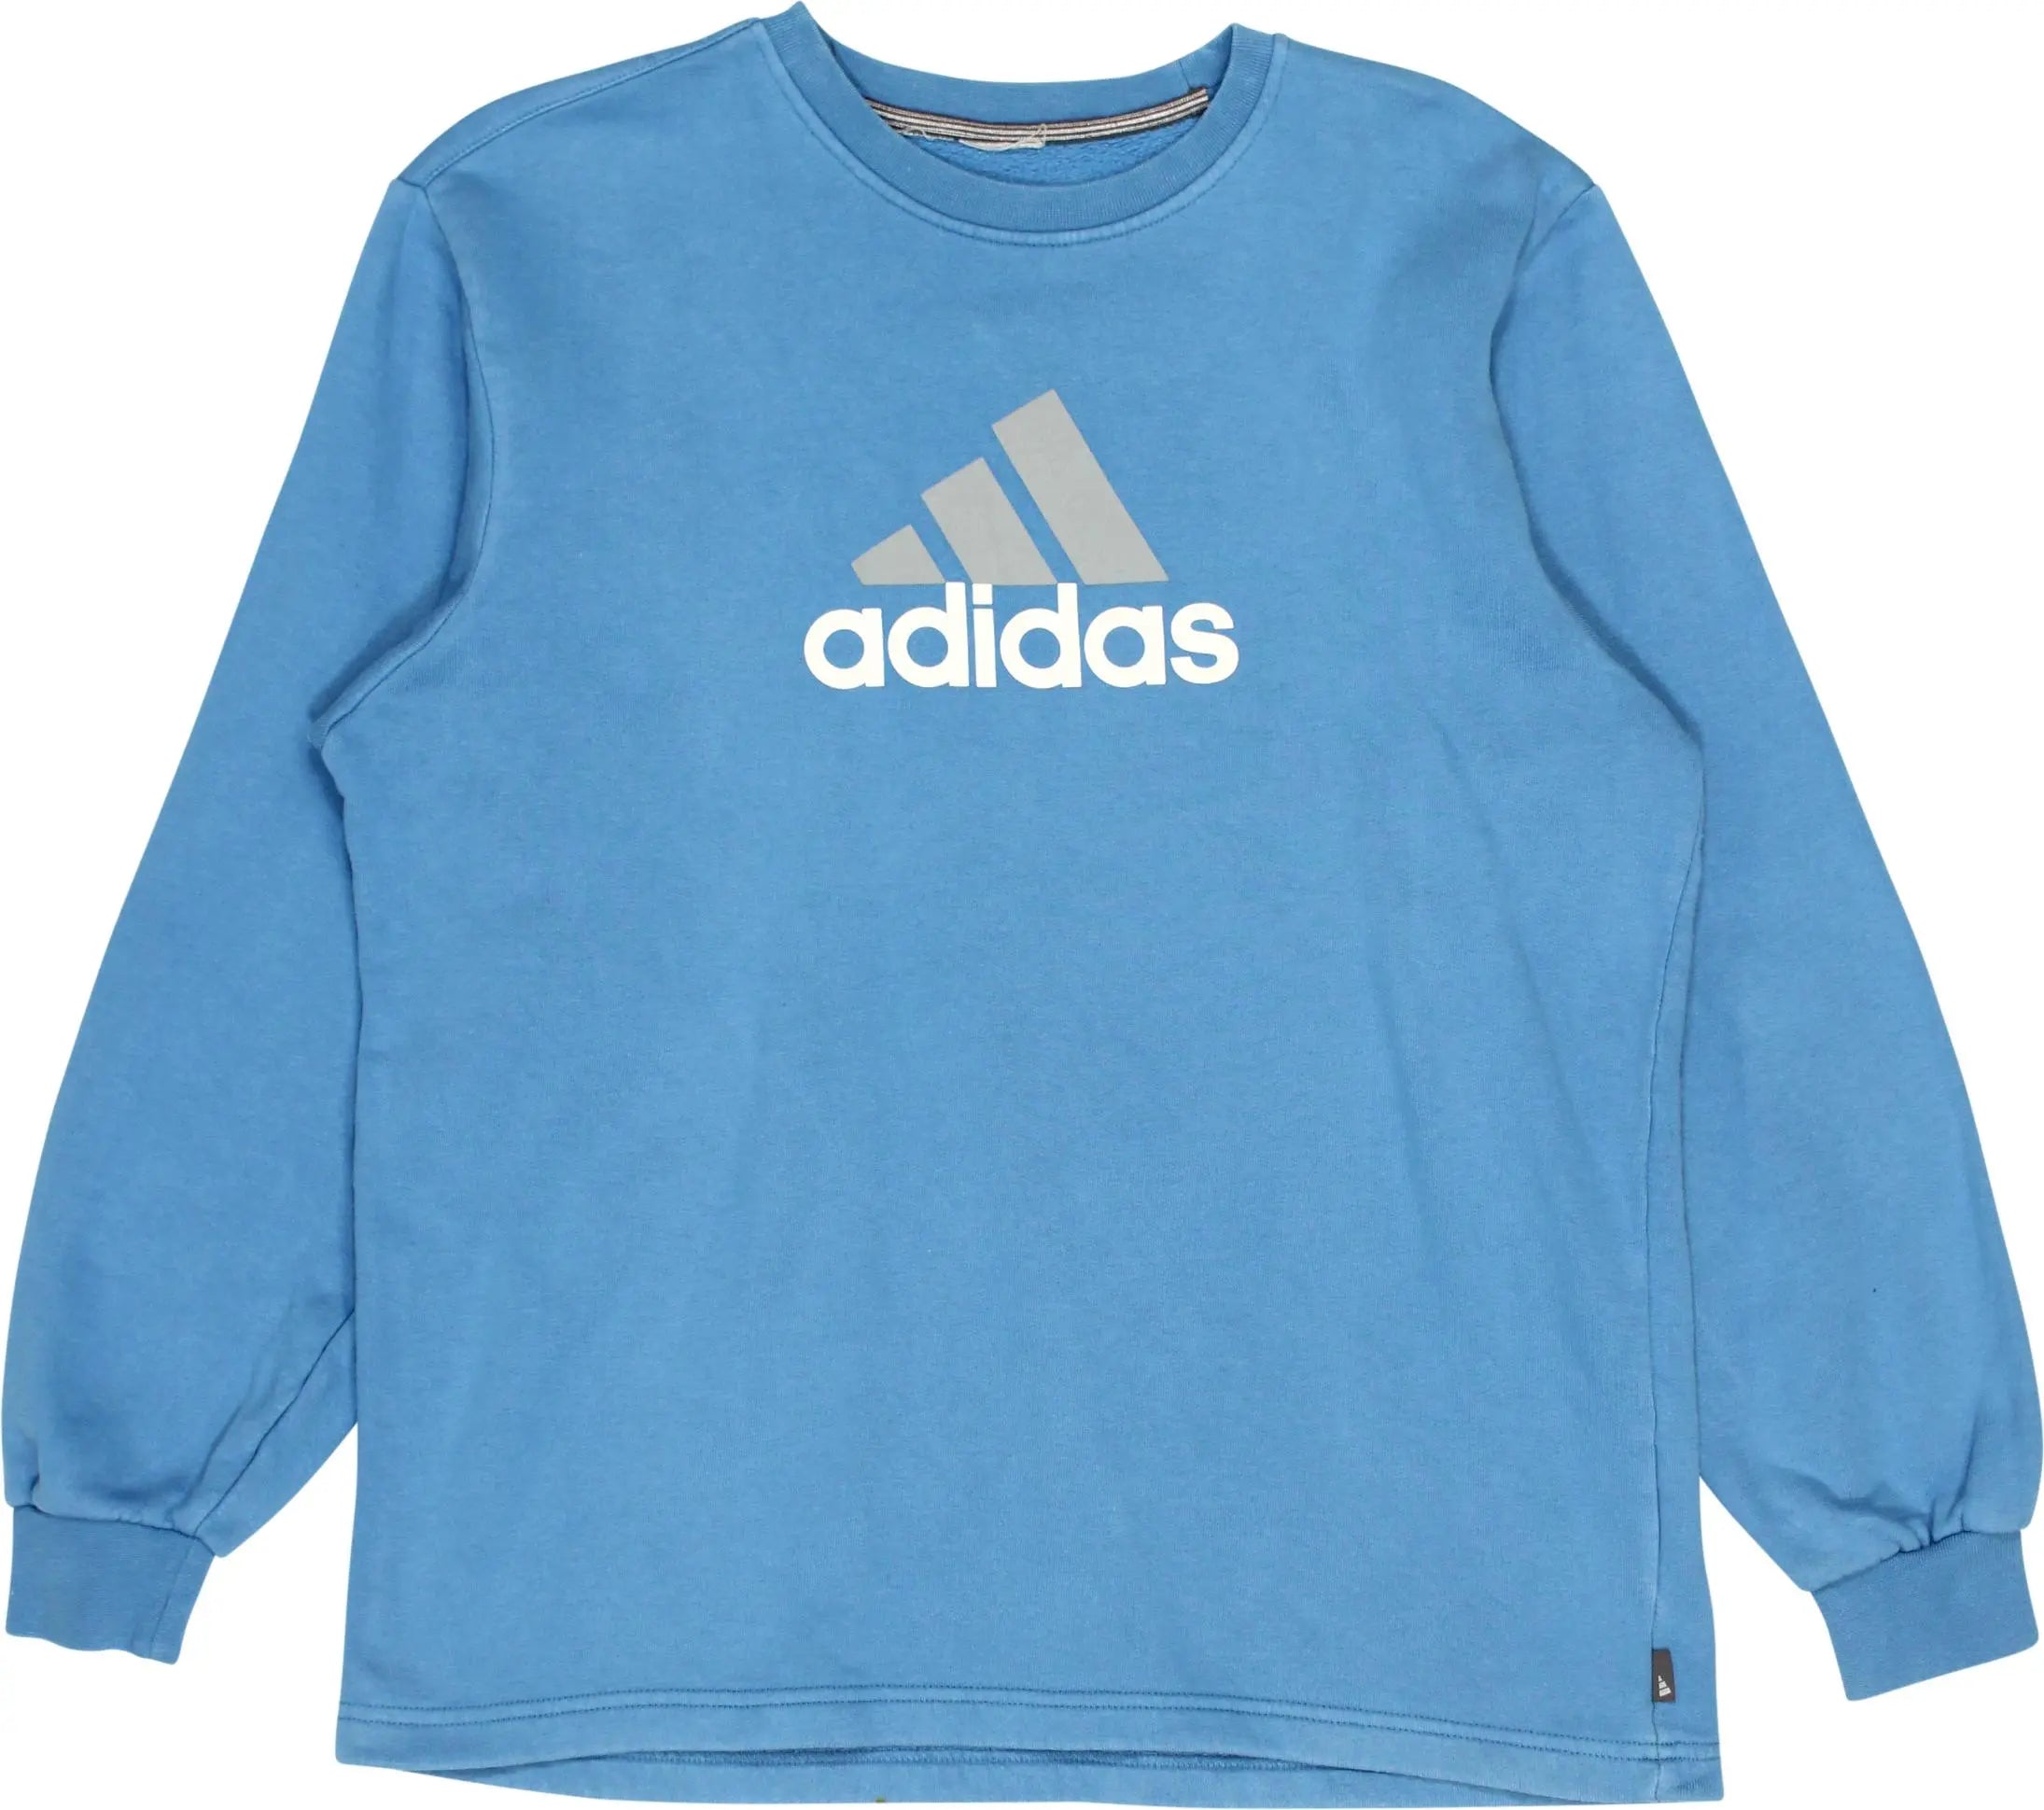 Adidas - Blue Sweater by Adidas- ThriftTale.com - Vintage and second handclothing